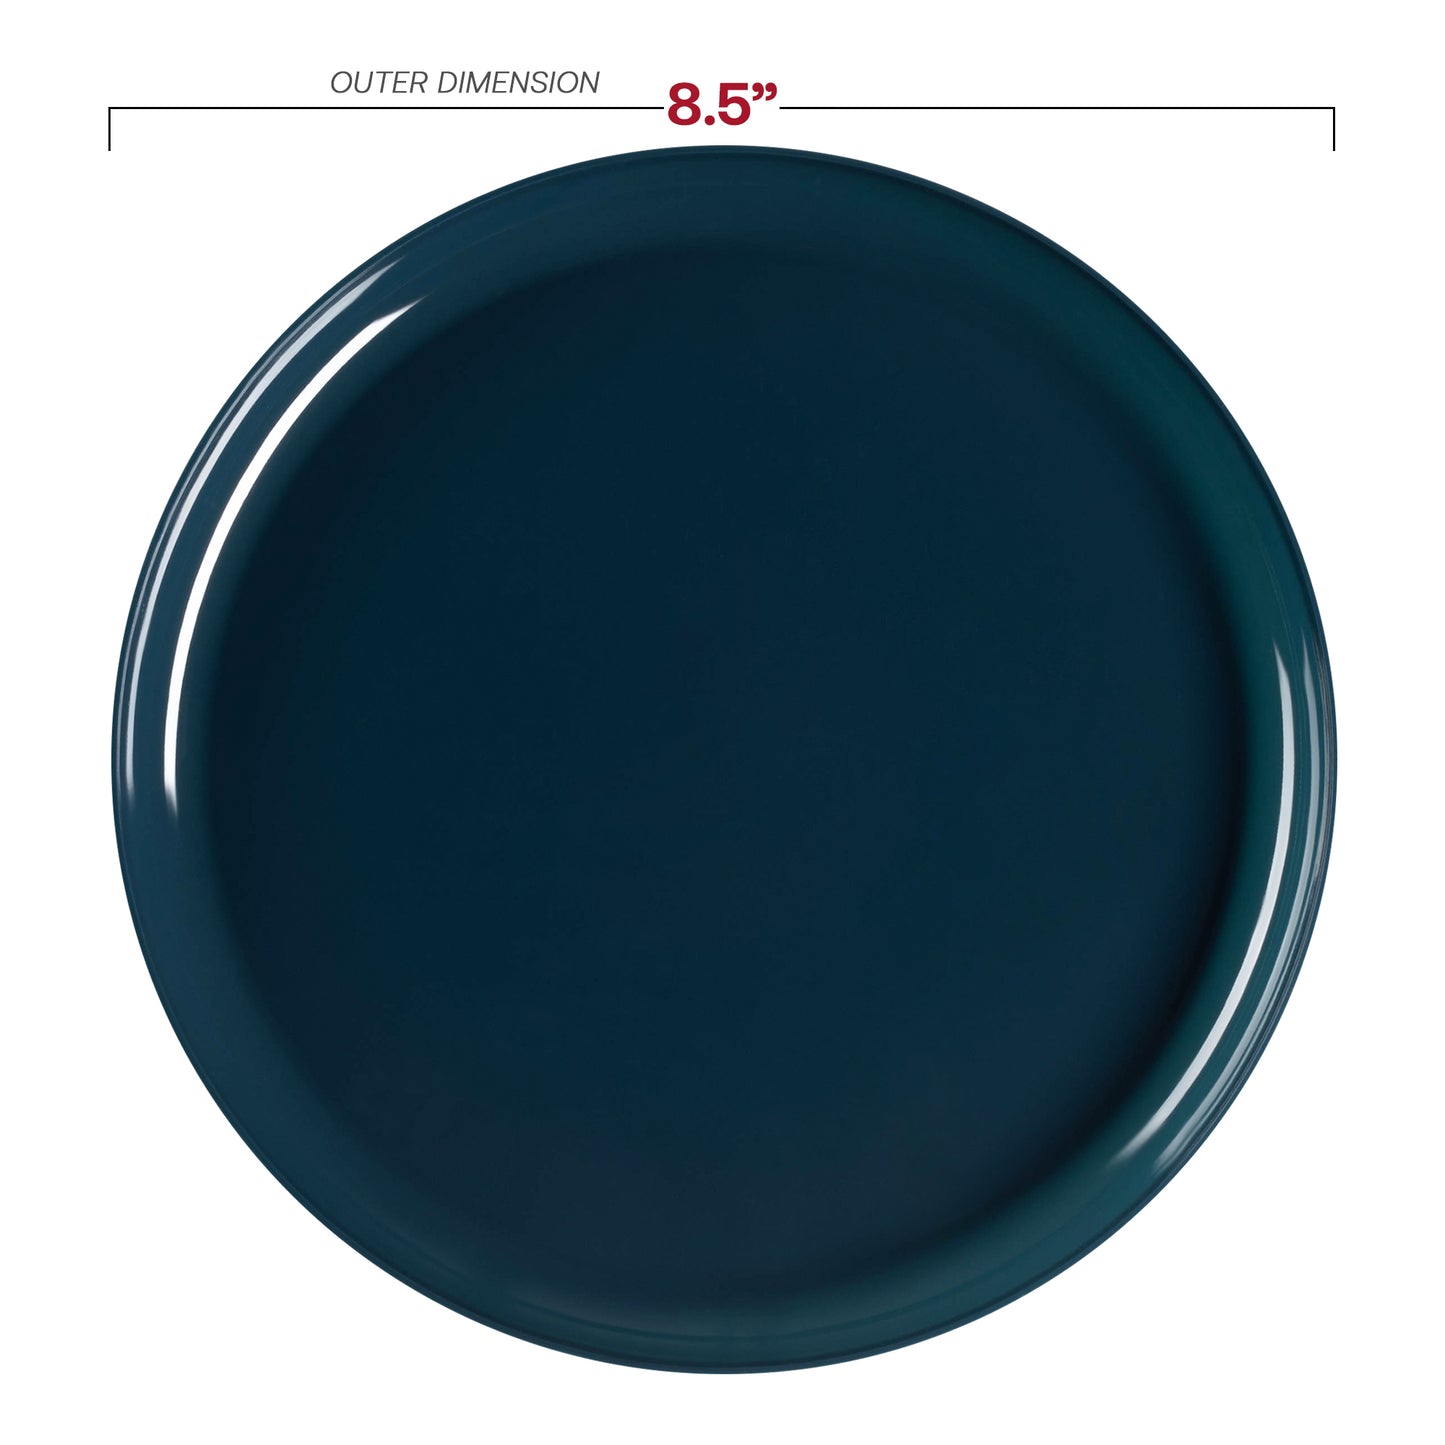 Navy Flat Round Disposable Plastic Appetizer/Salad Plates (8.5") Dimension | The Kaya Collection